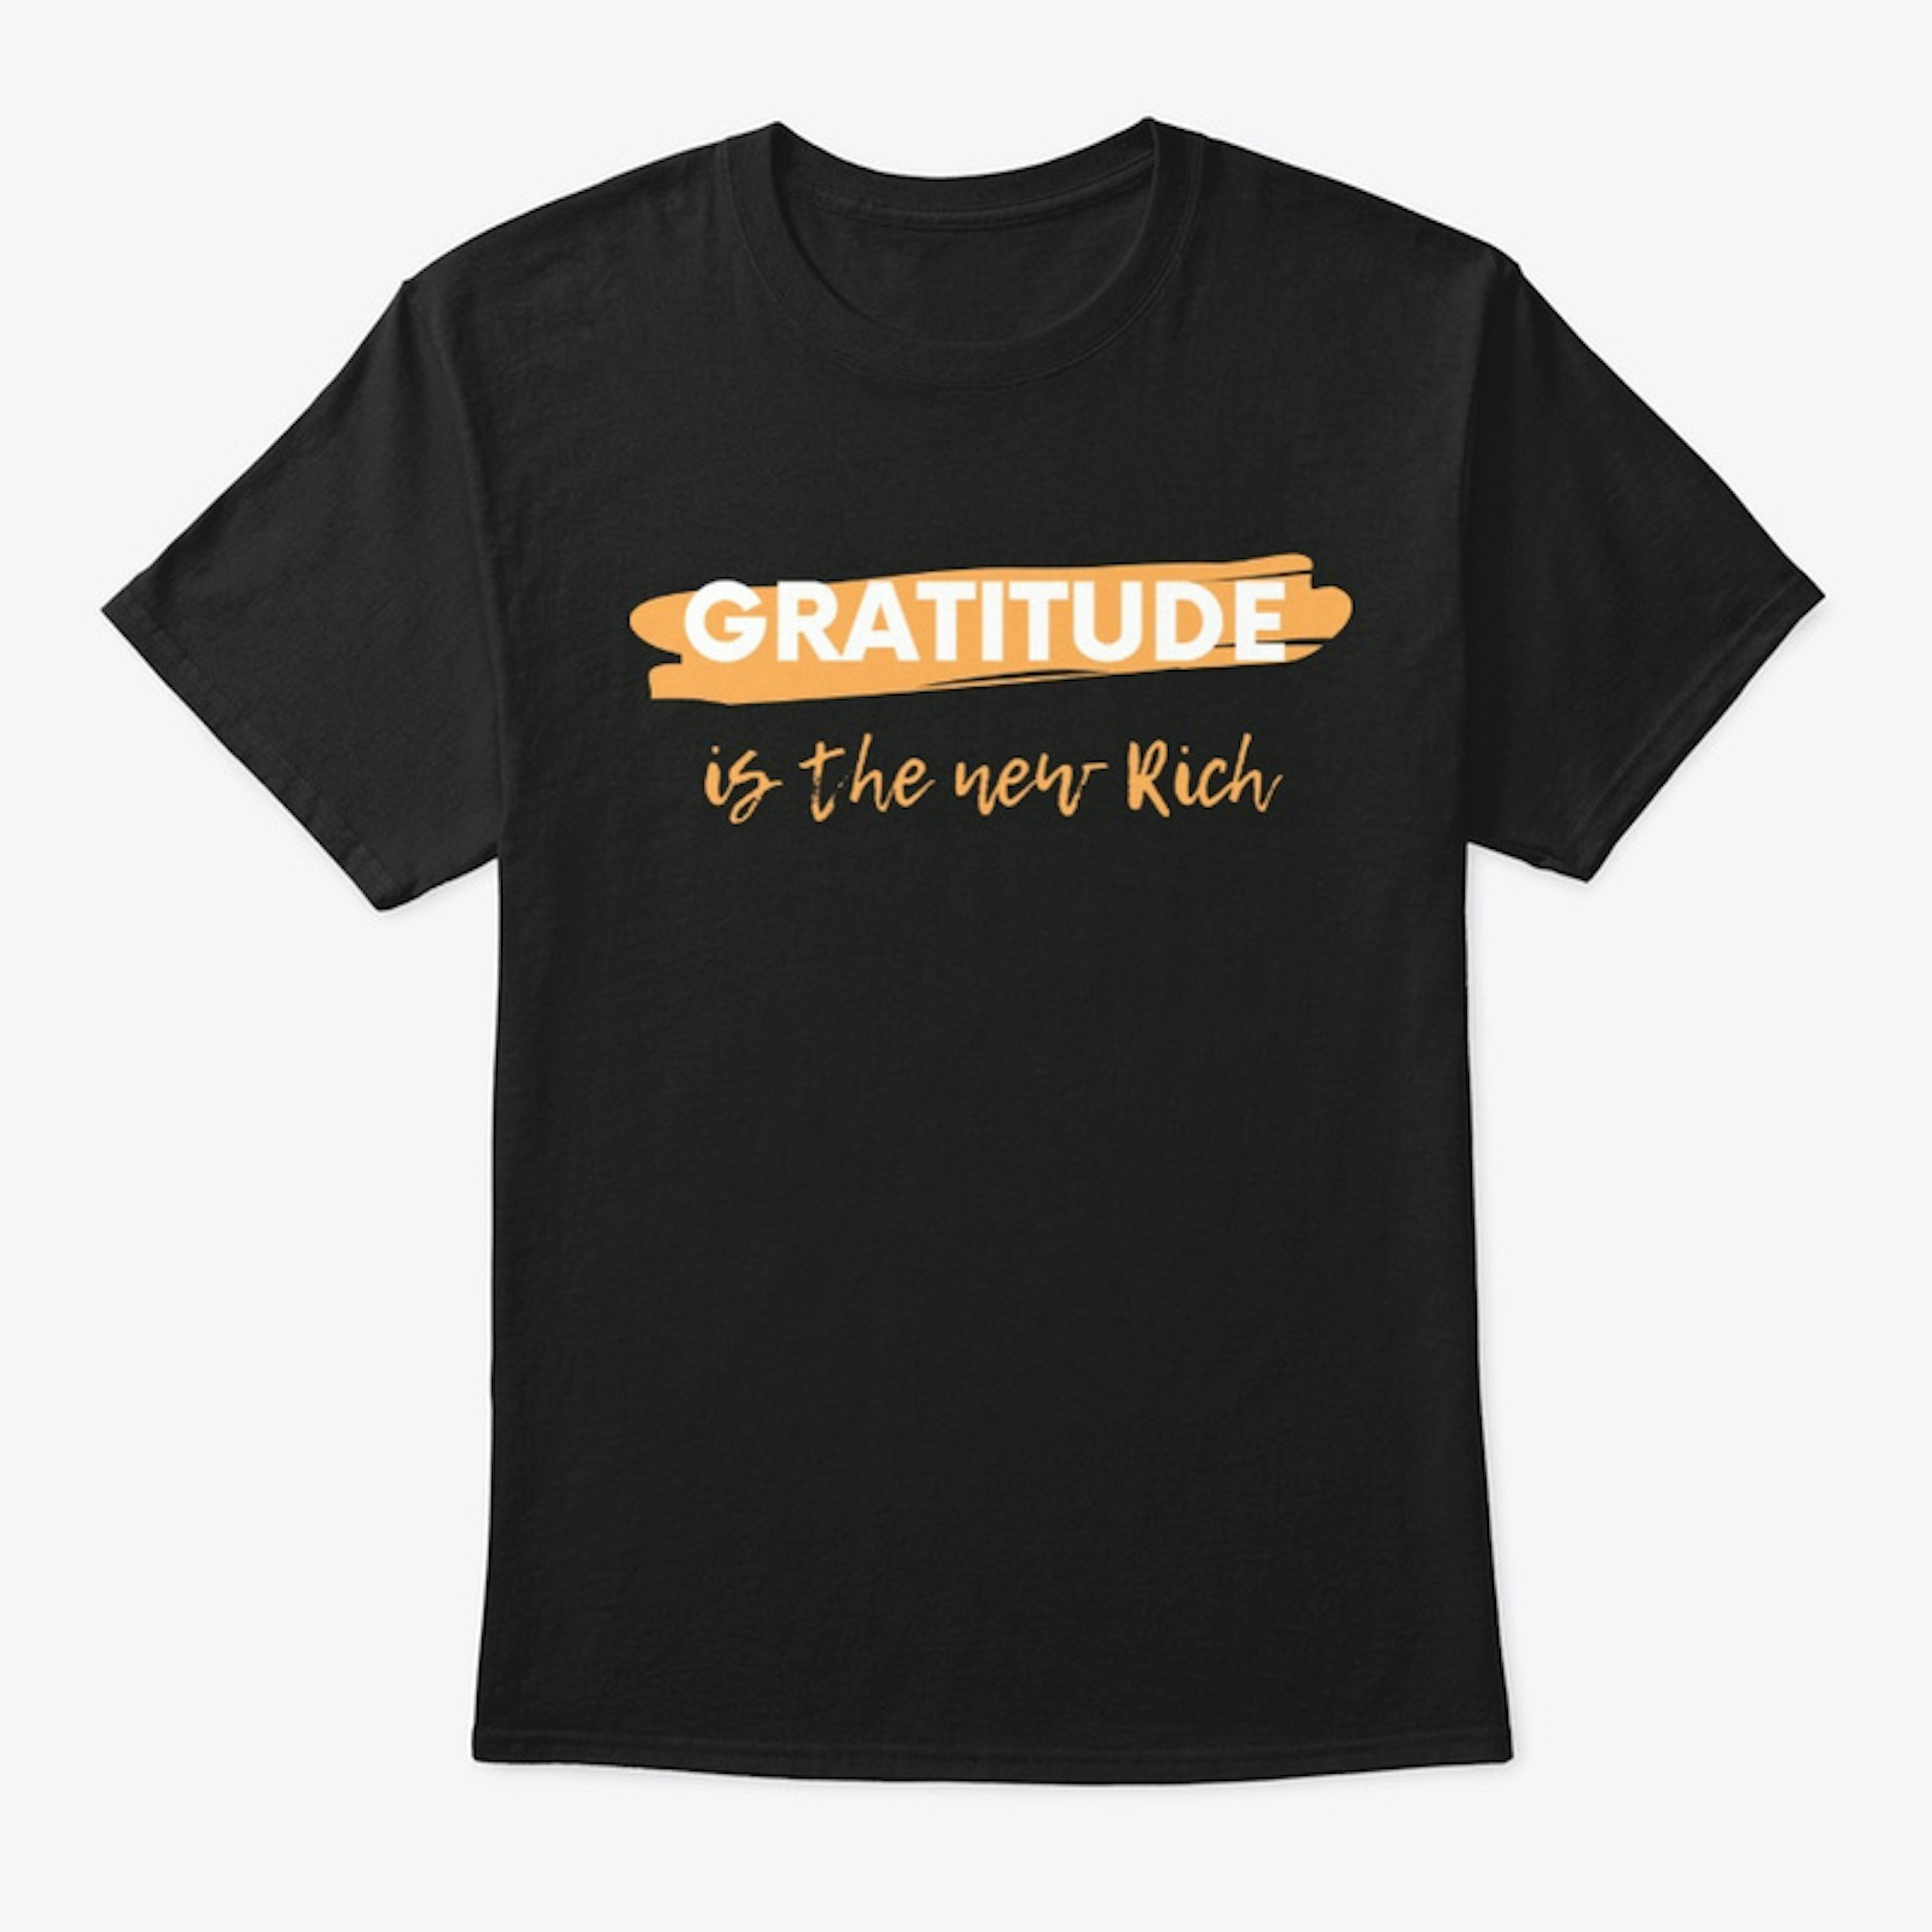 Gratitude is the new rich T shirt